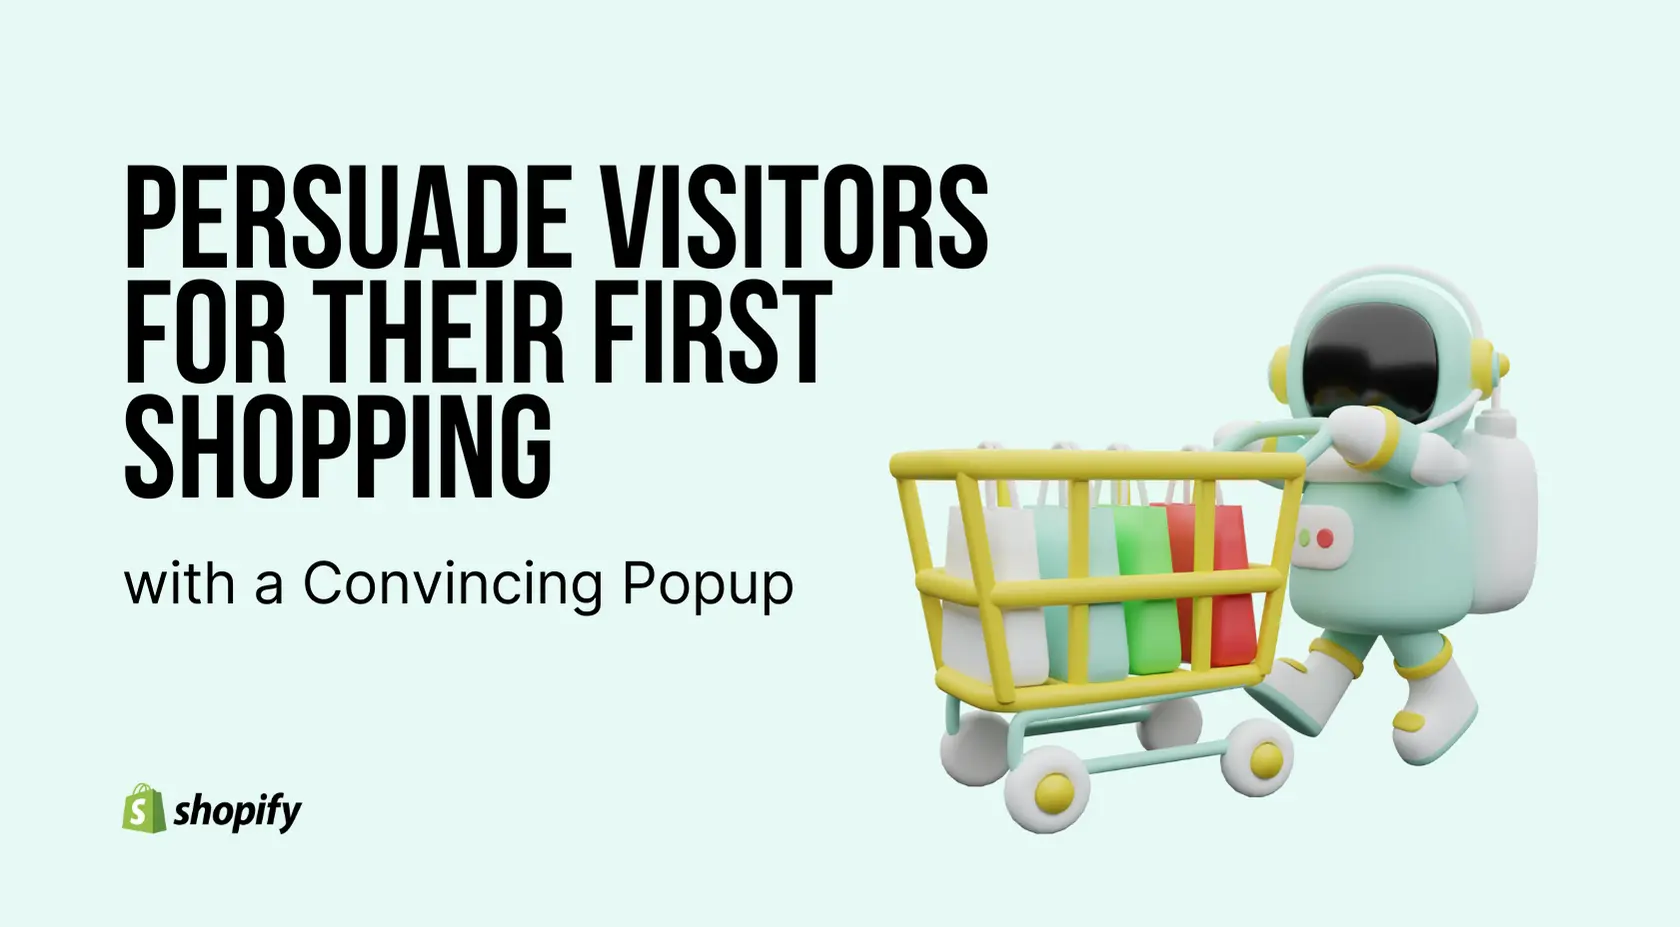 Persuade Visitors for Their First Shopping with a Convincing Popup on Your Shopify Store